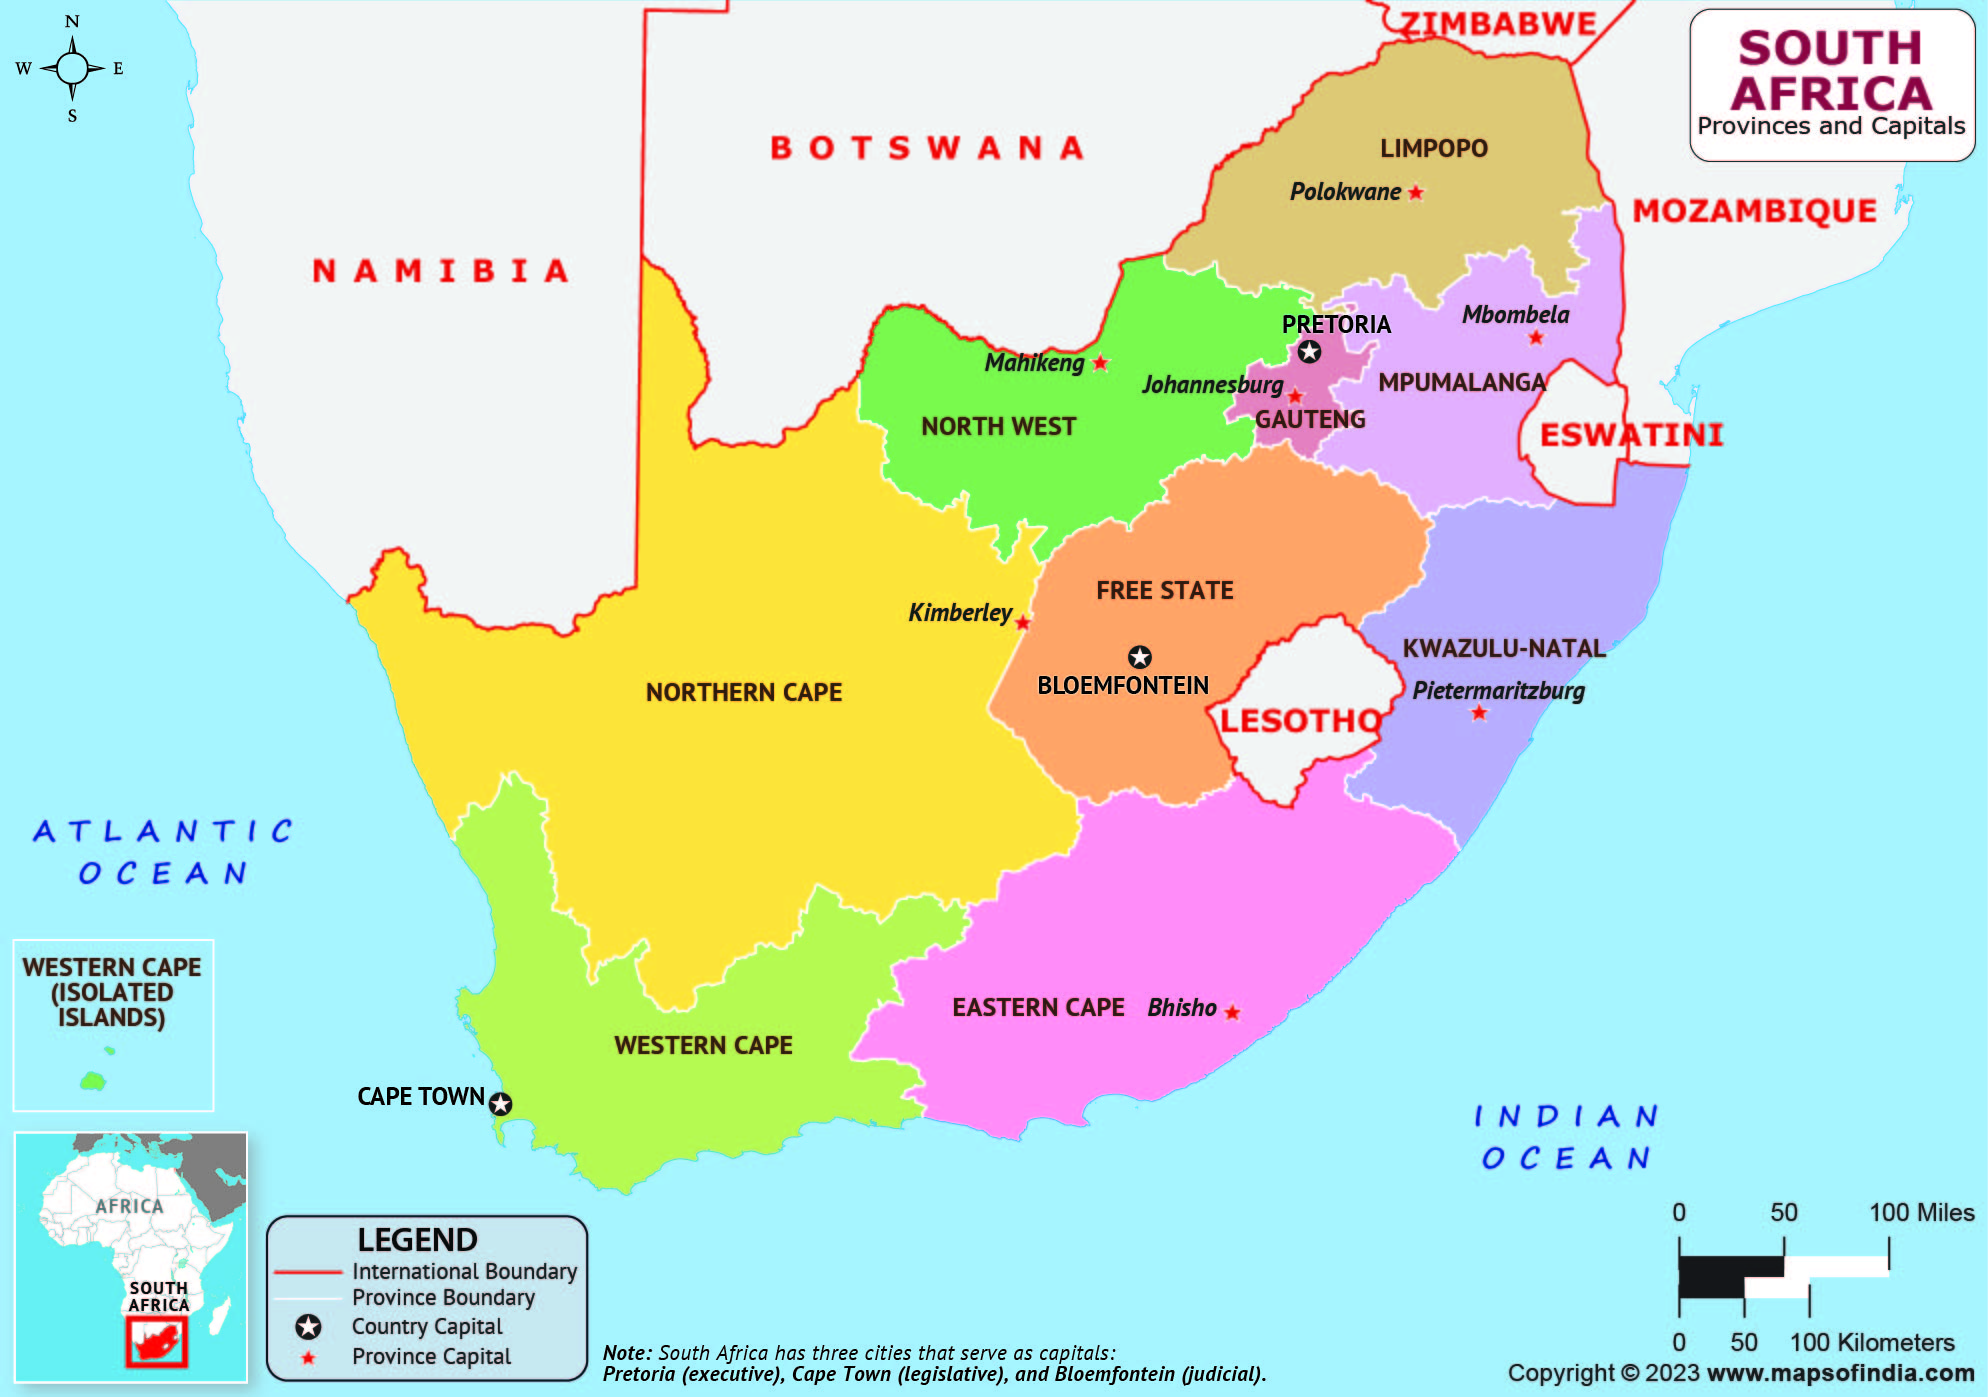 South Africa Provinces and Capital Map